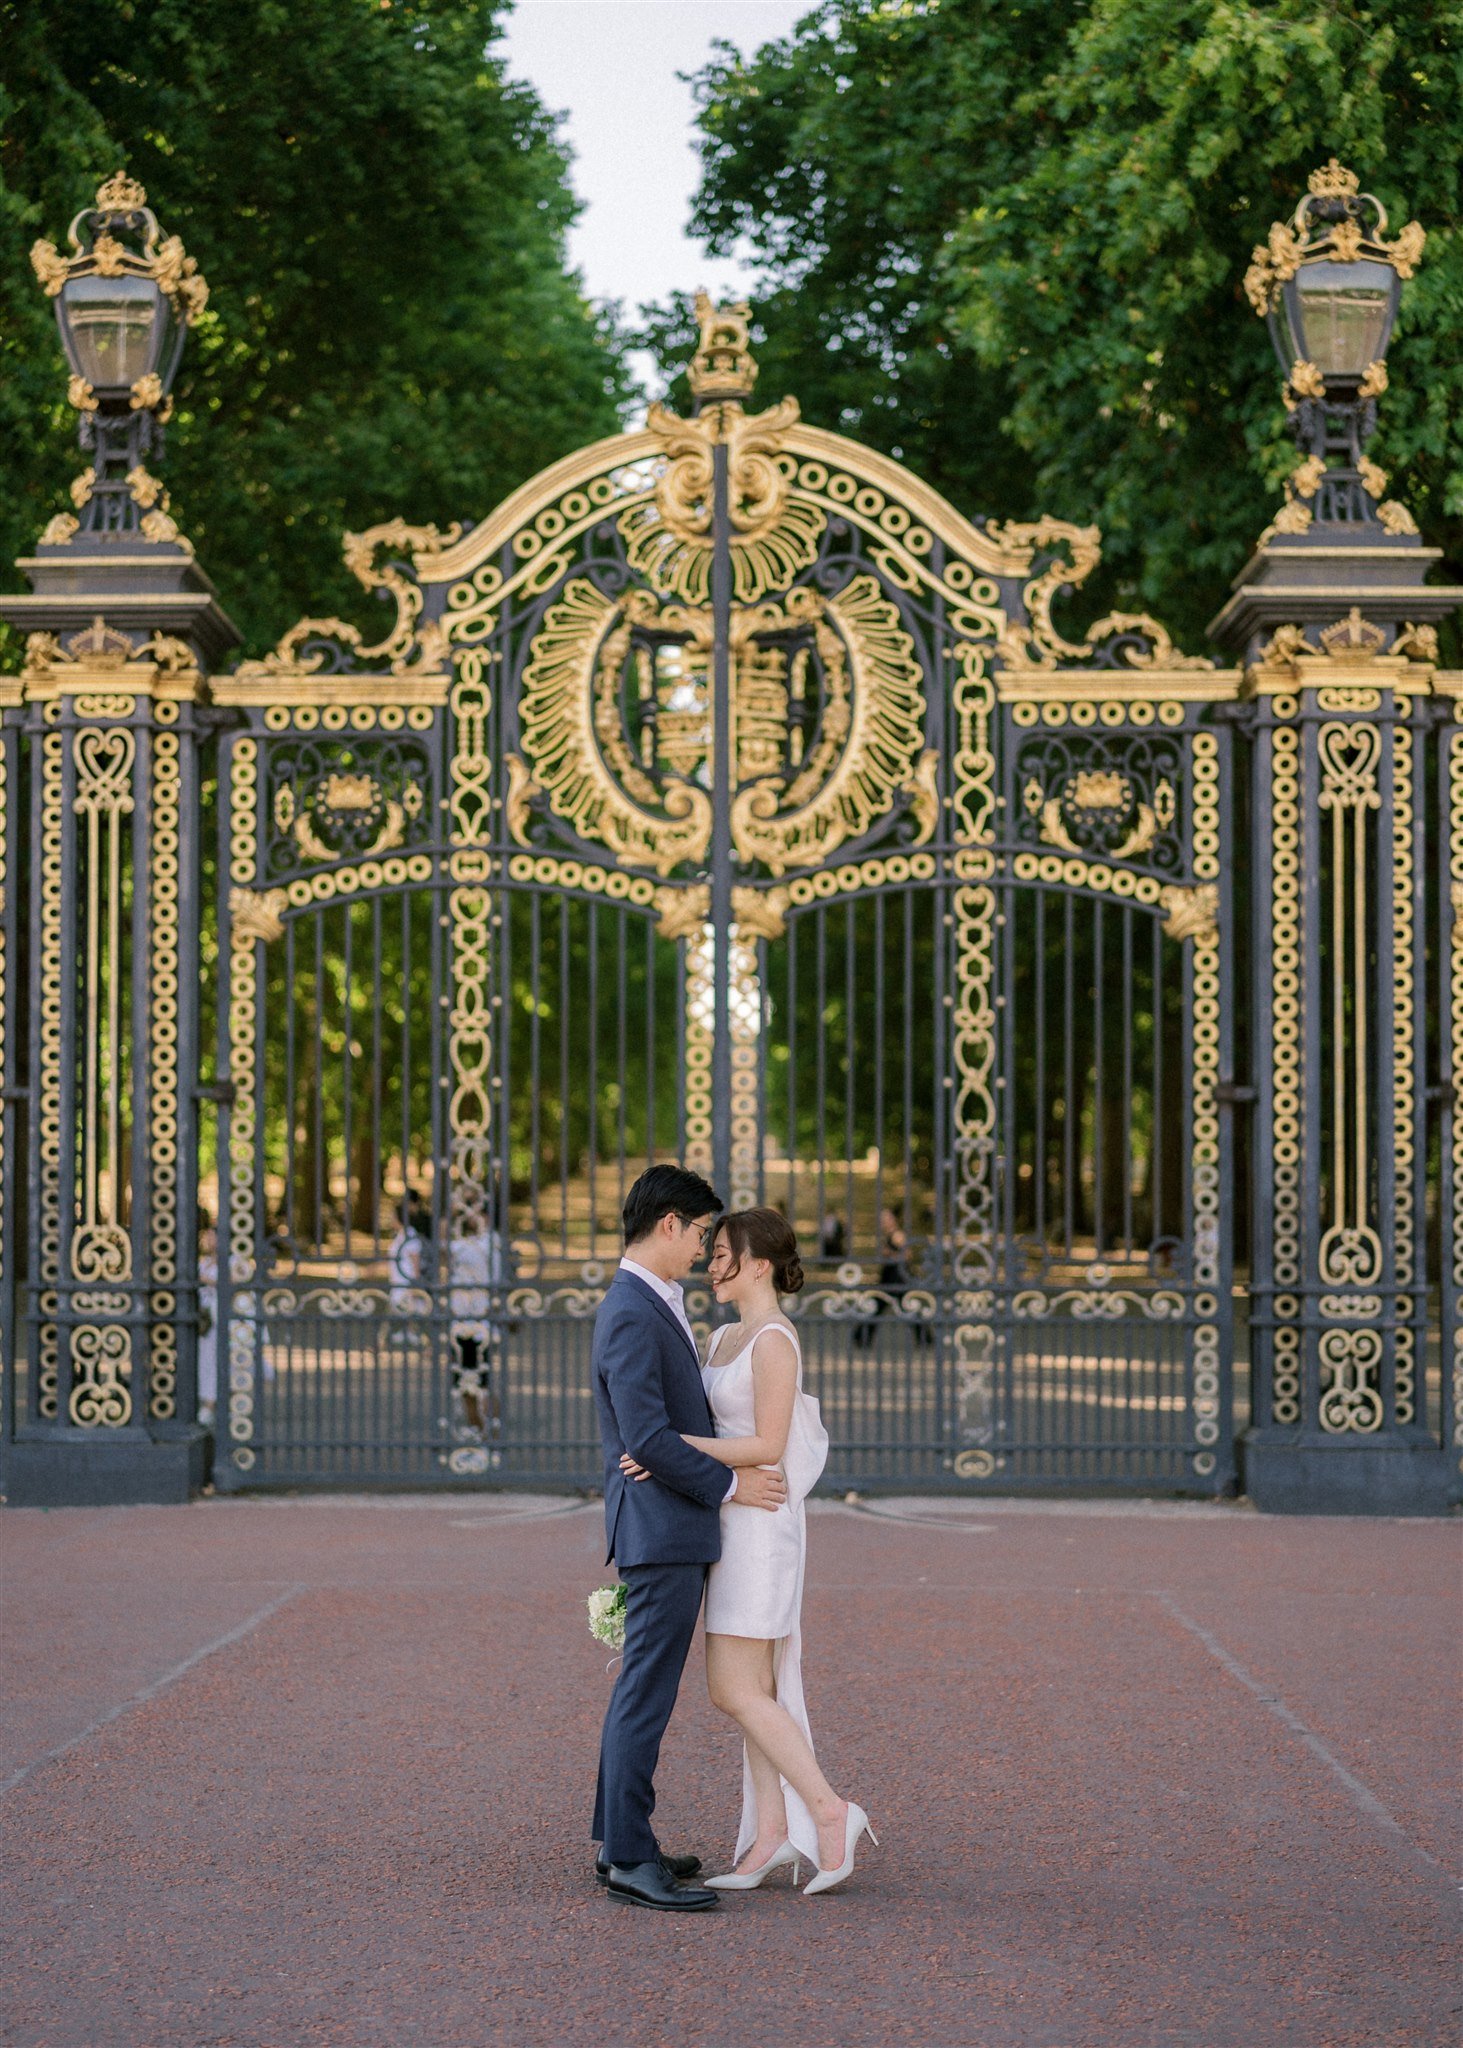 Engagement photoshoot in Green Park, London